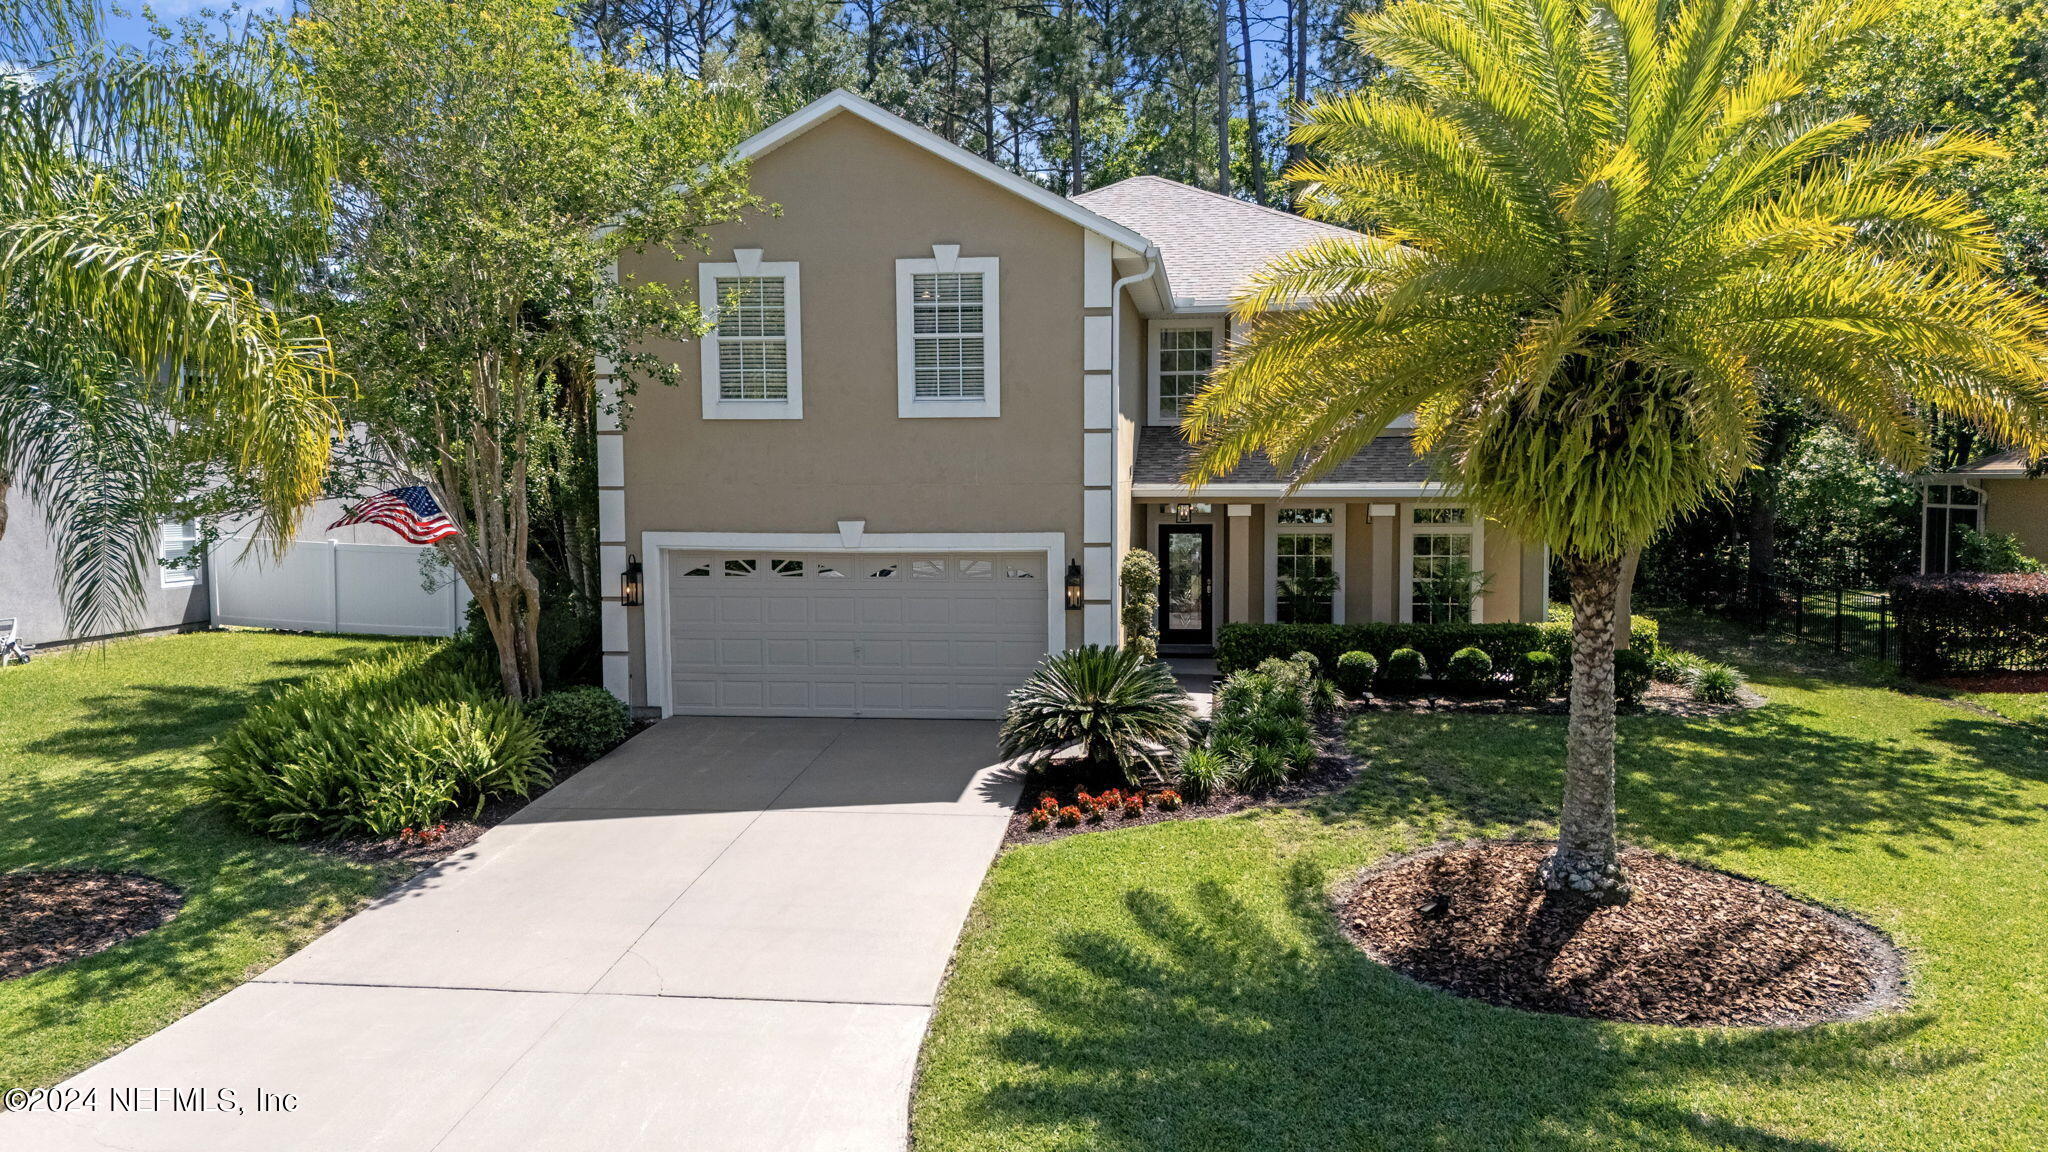 St Johns, FL home for sale located at 1825 W Windy Way, St Johns, FL 32259